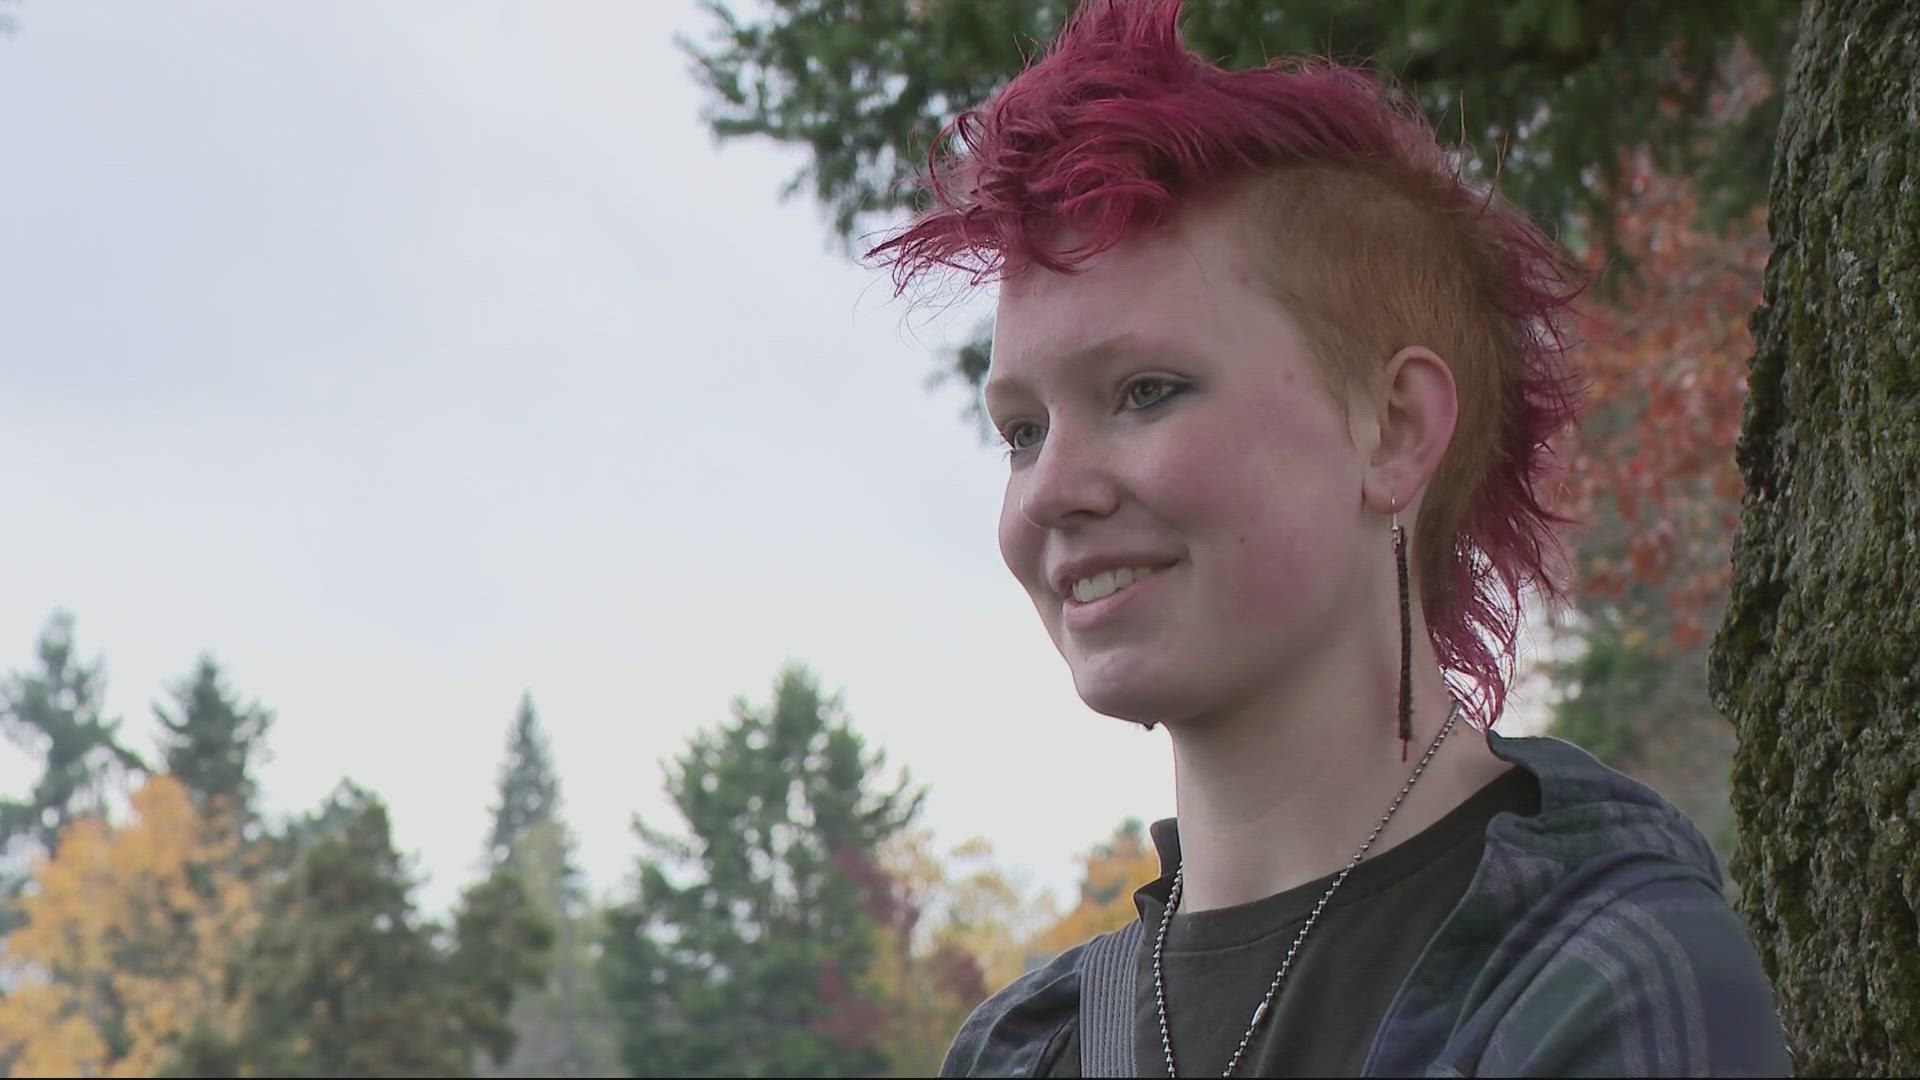 Some Portland Public Schools students said they're still waiting for recommendation letters and transcripts.